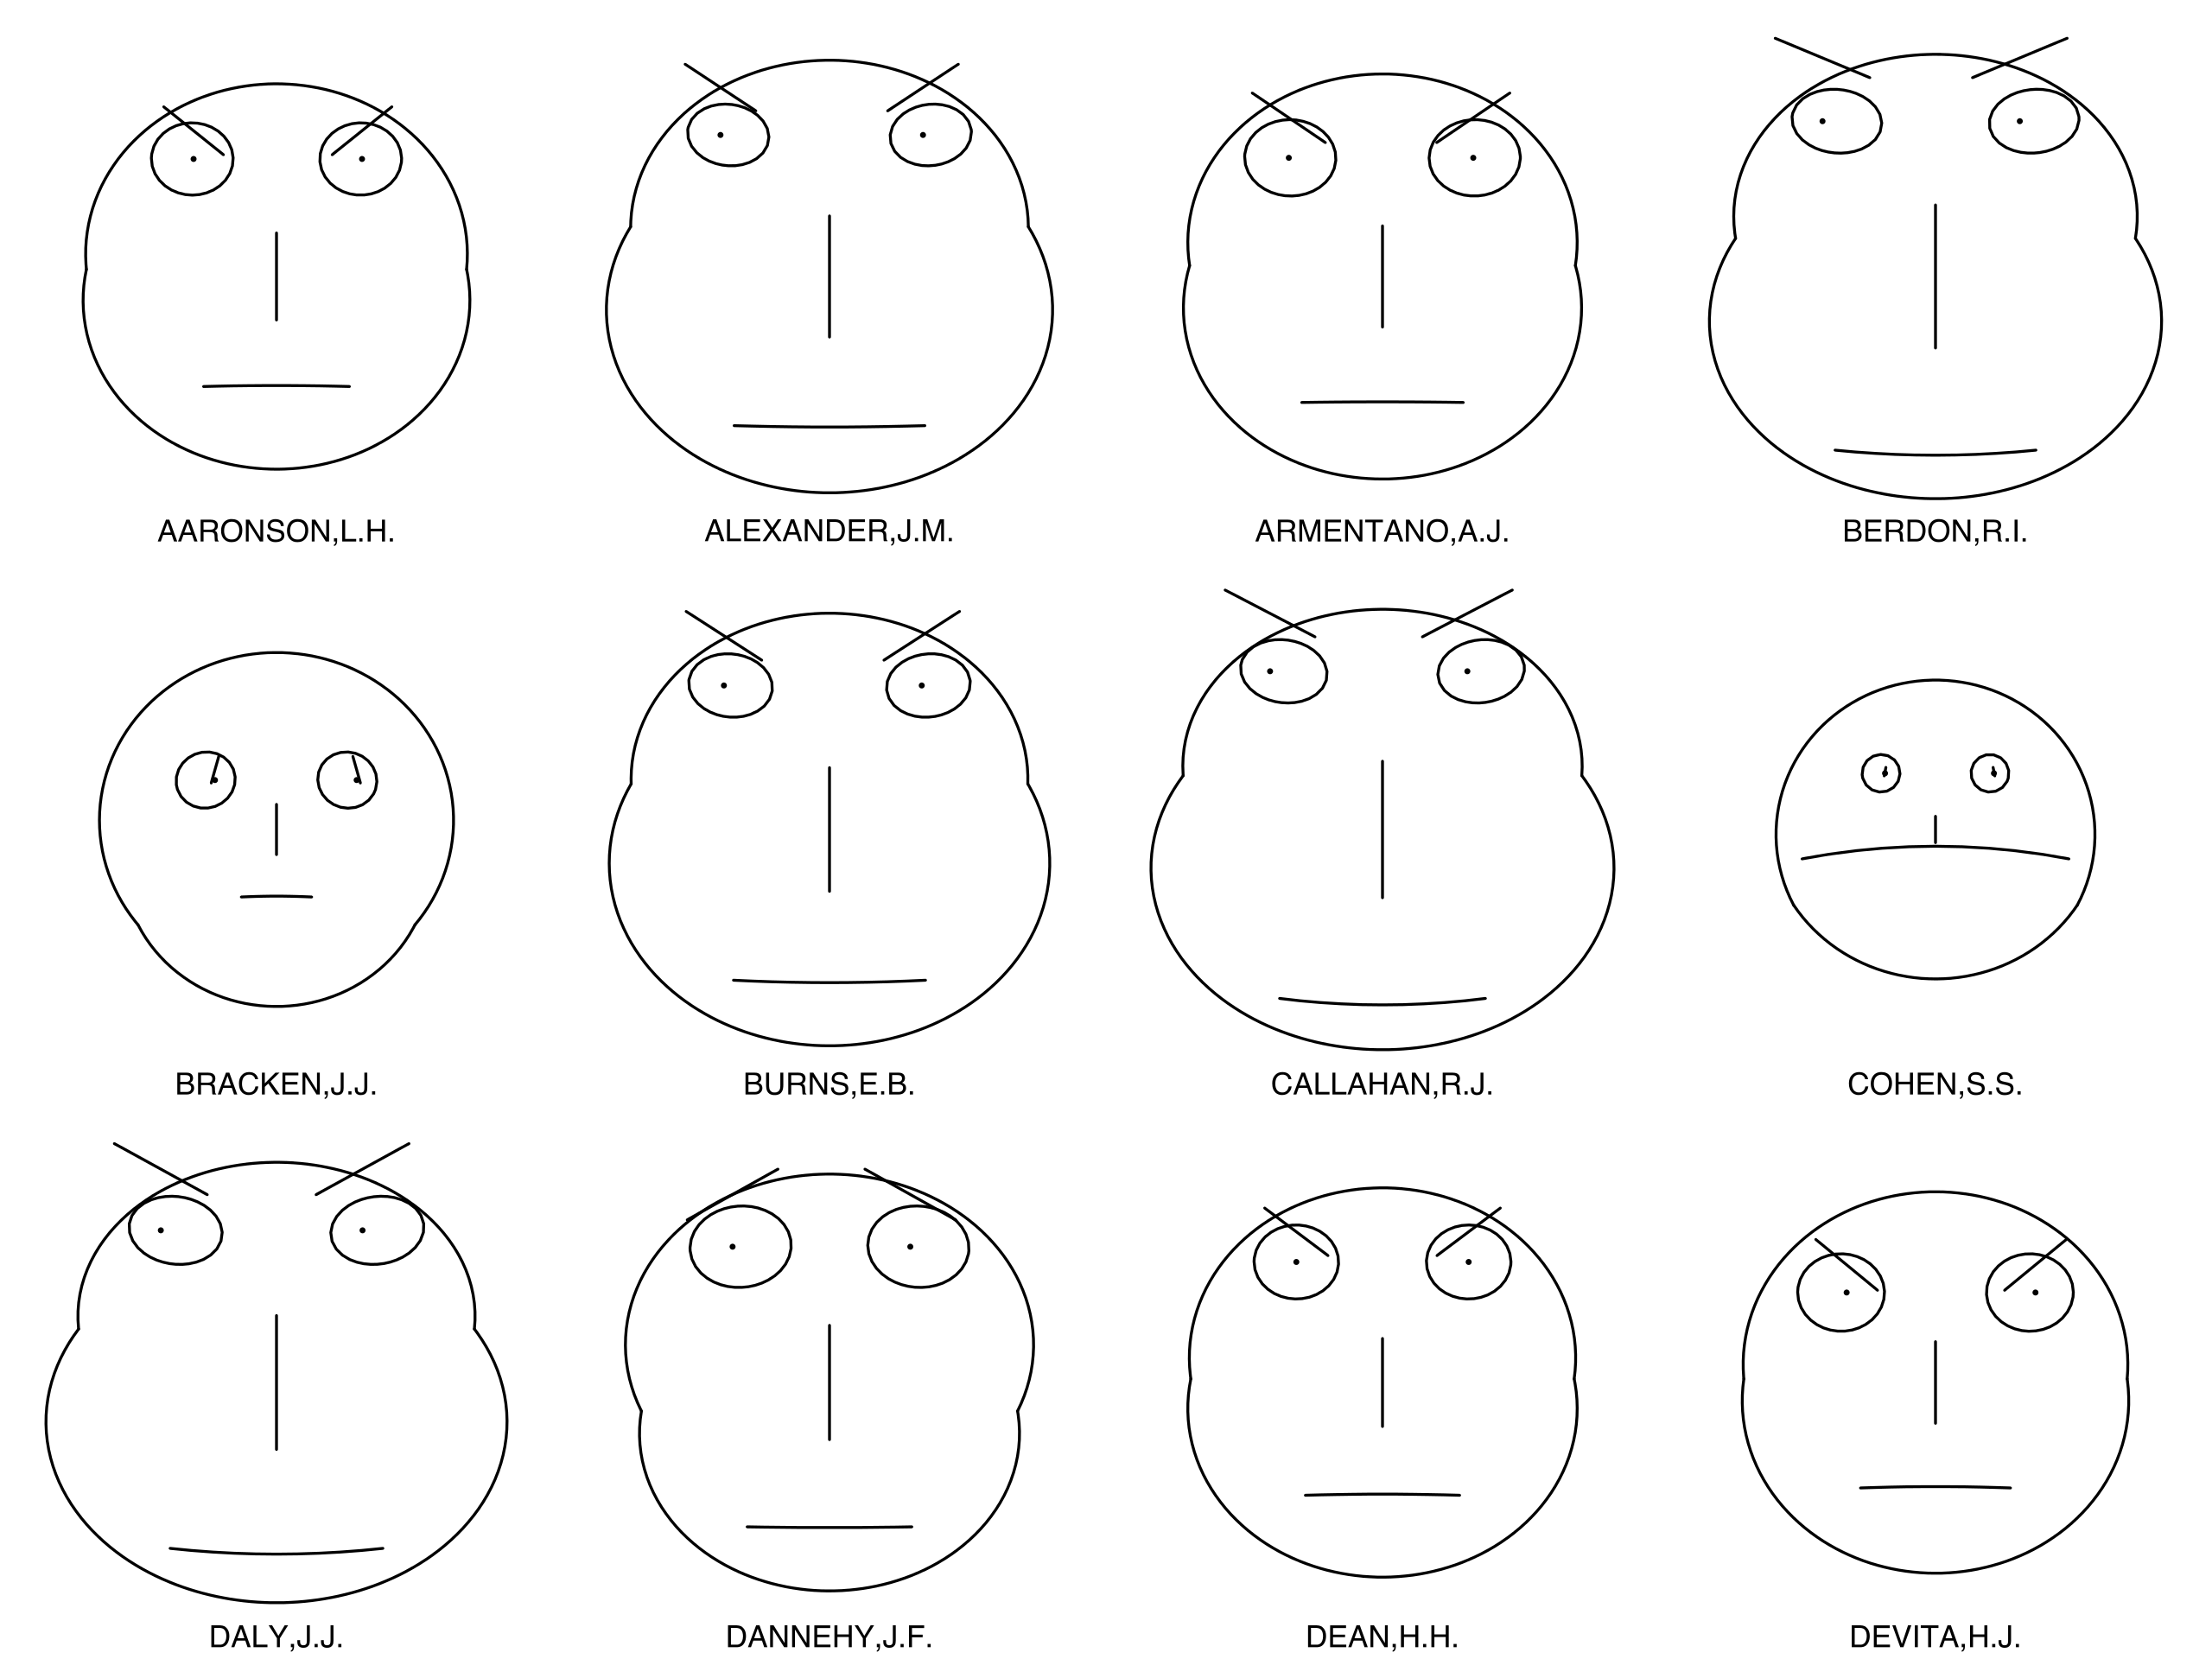 Chernoff faces, see surrounding text